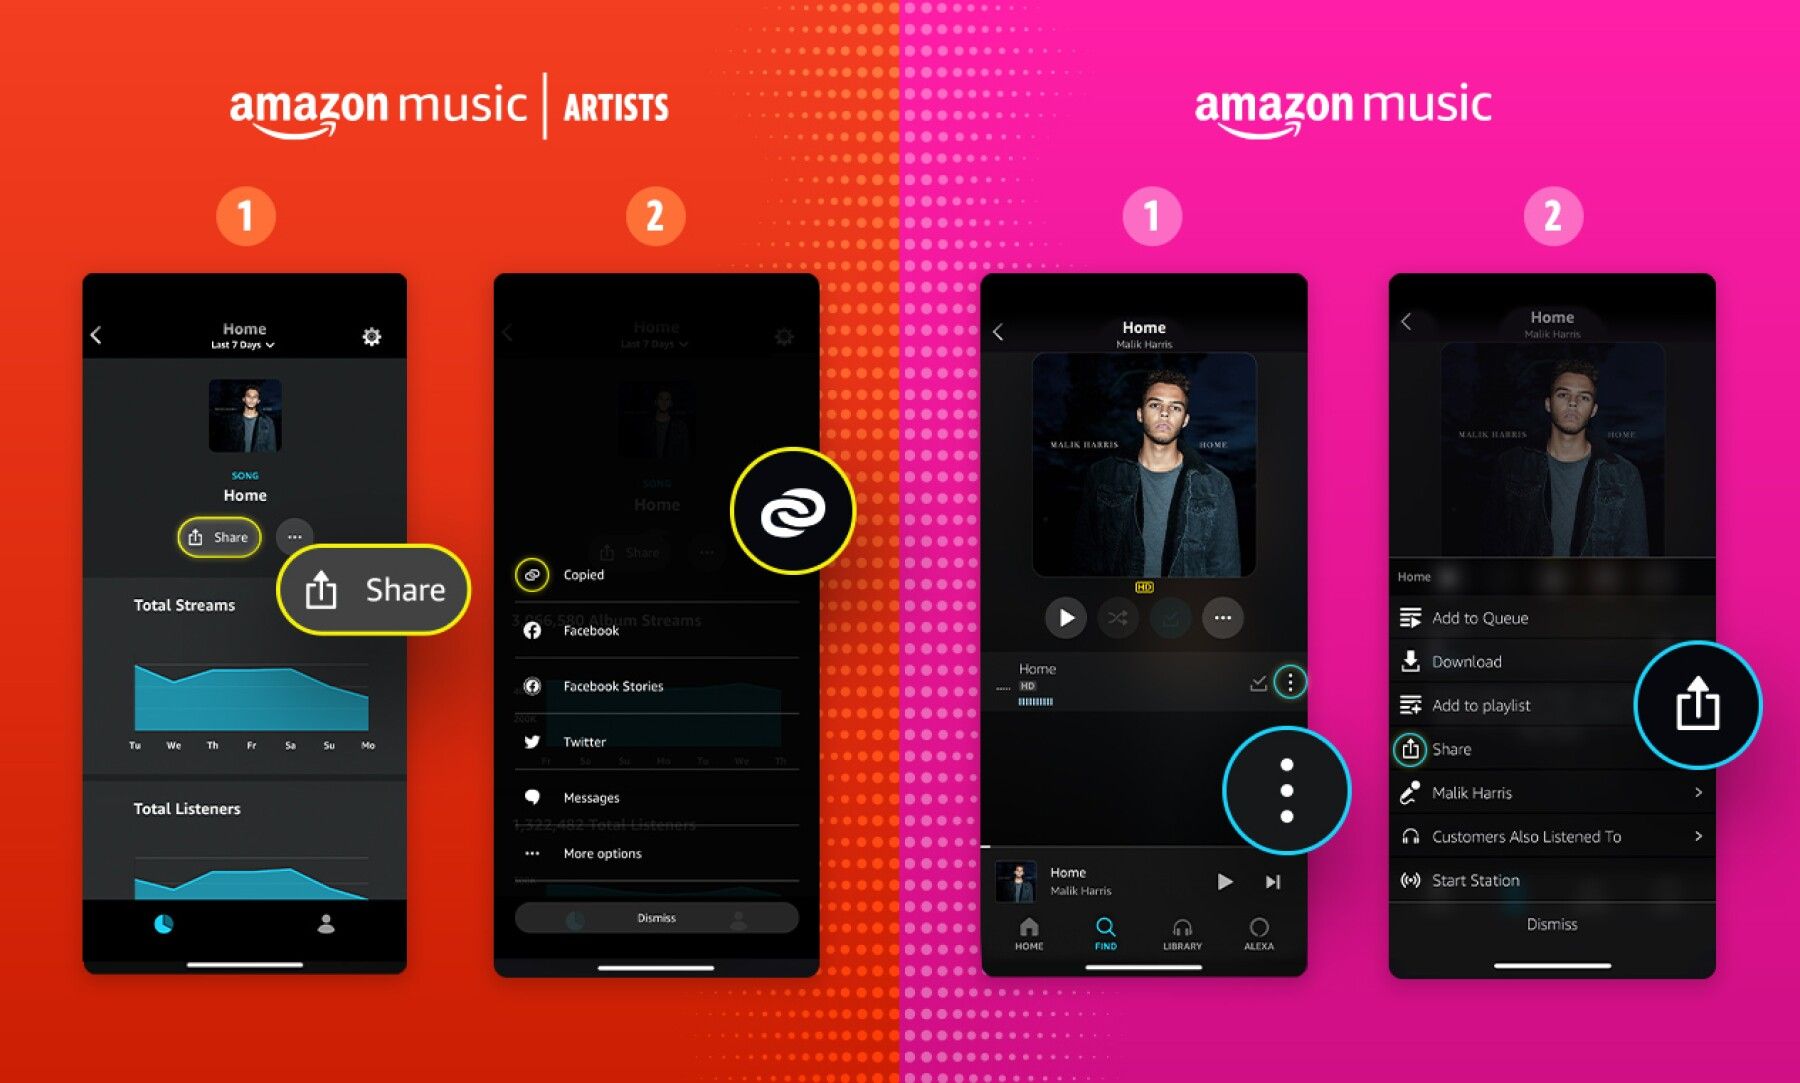 How Does Amazon Music Pay Artists